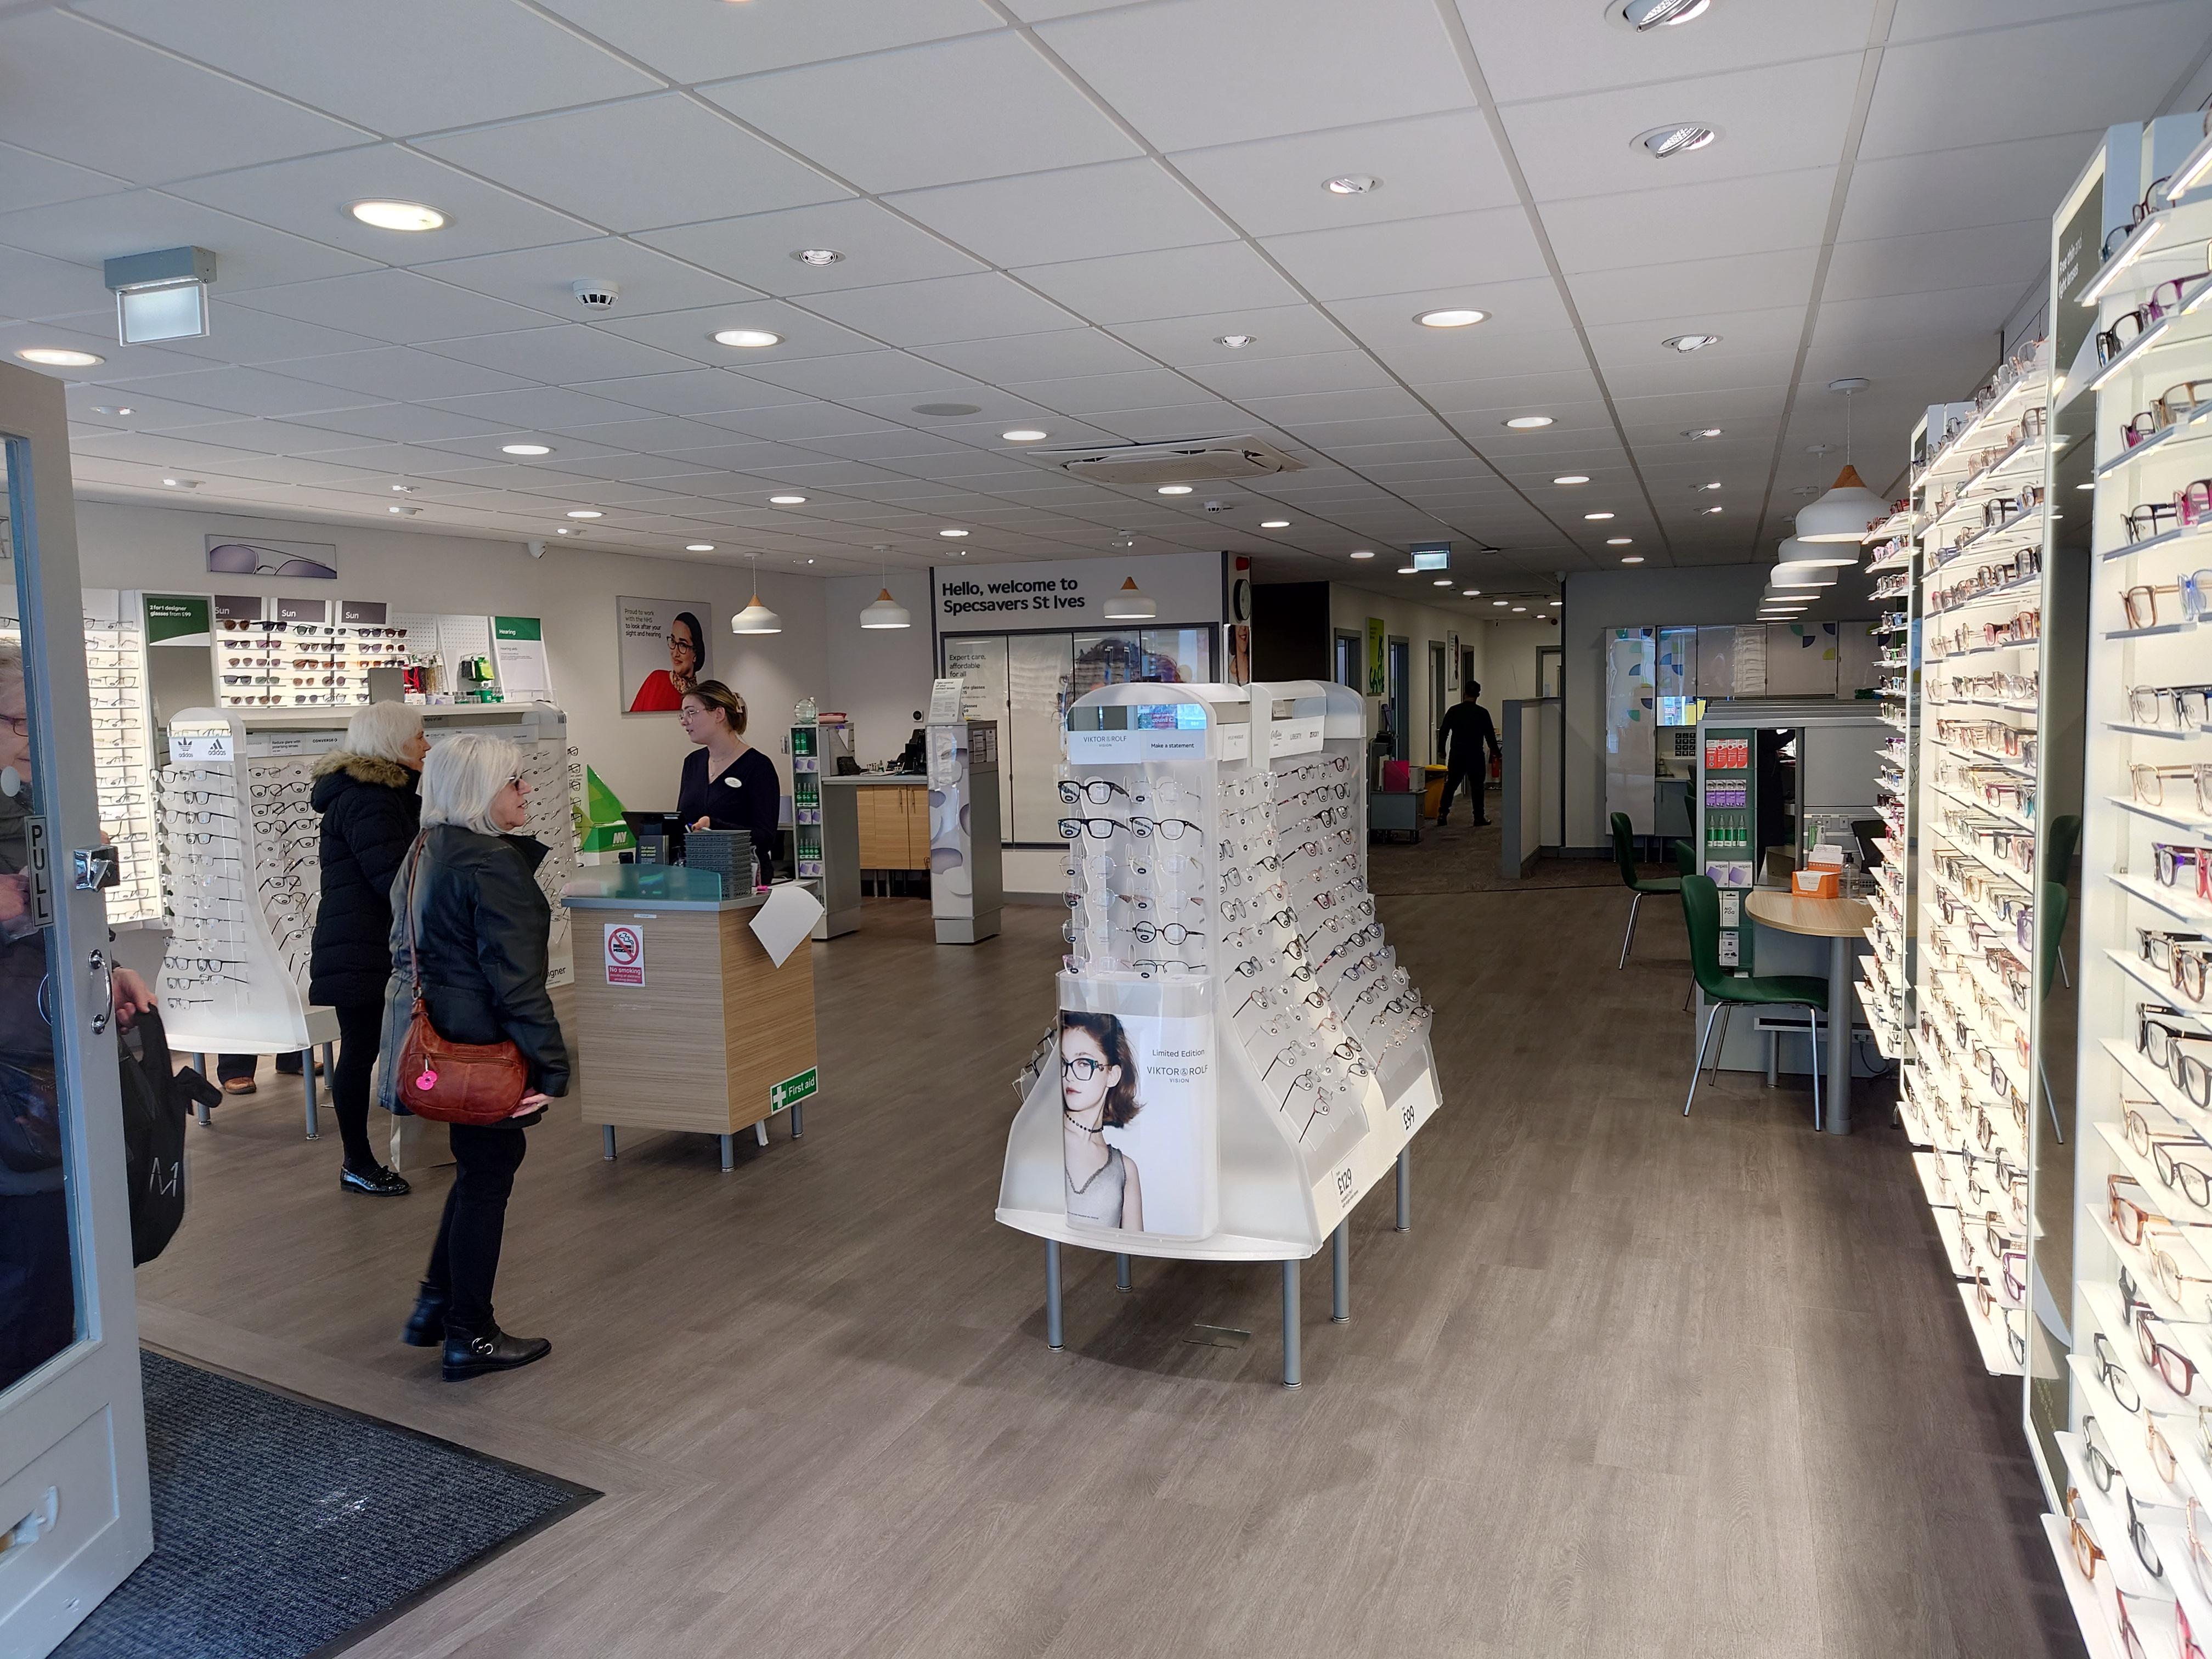 Images Specsavers Opticians and Audiologists - St Ives